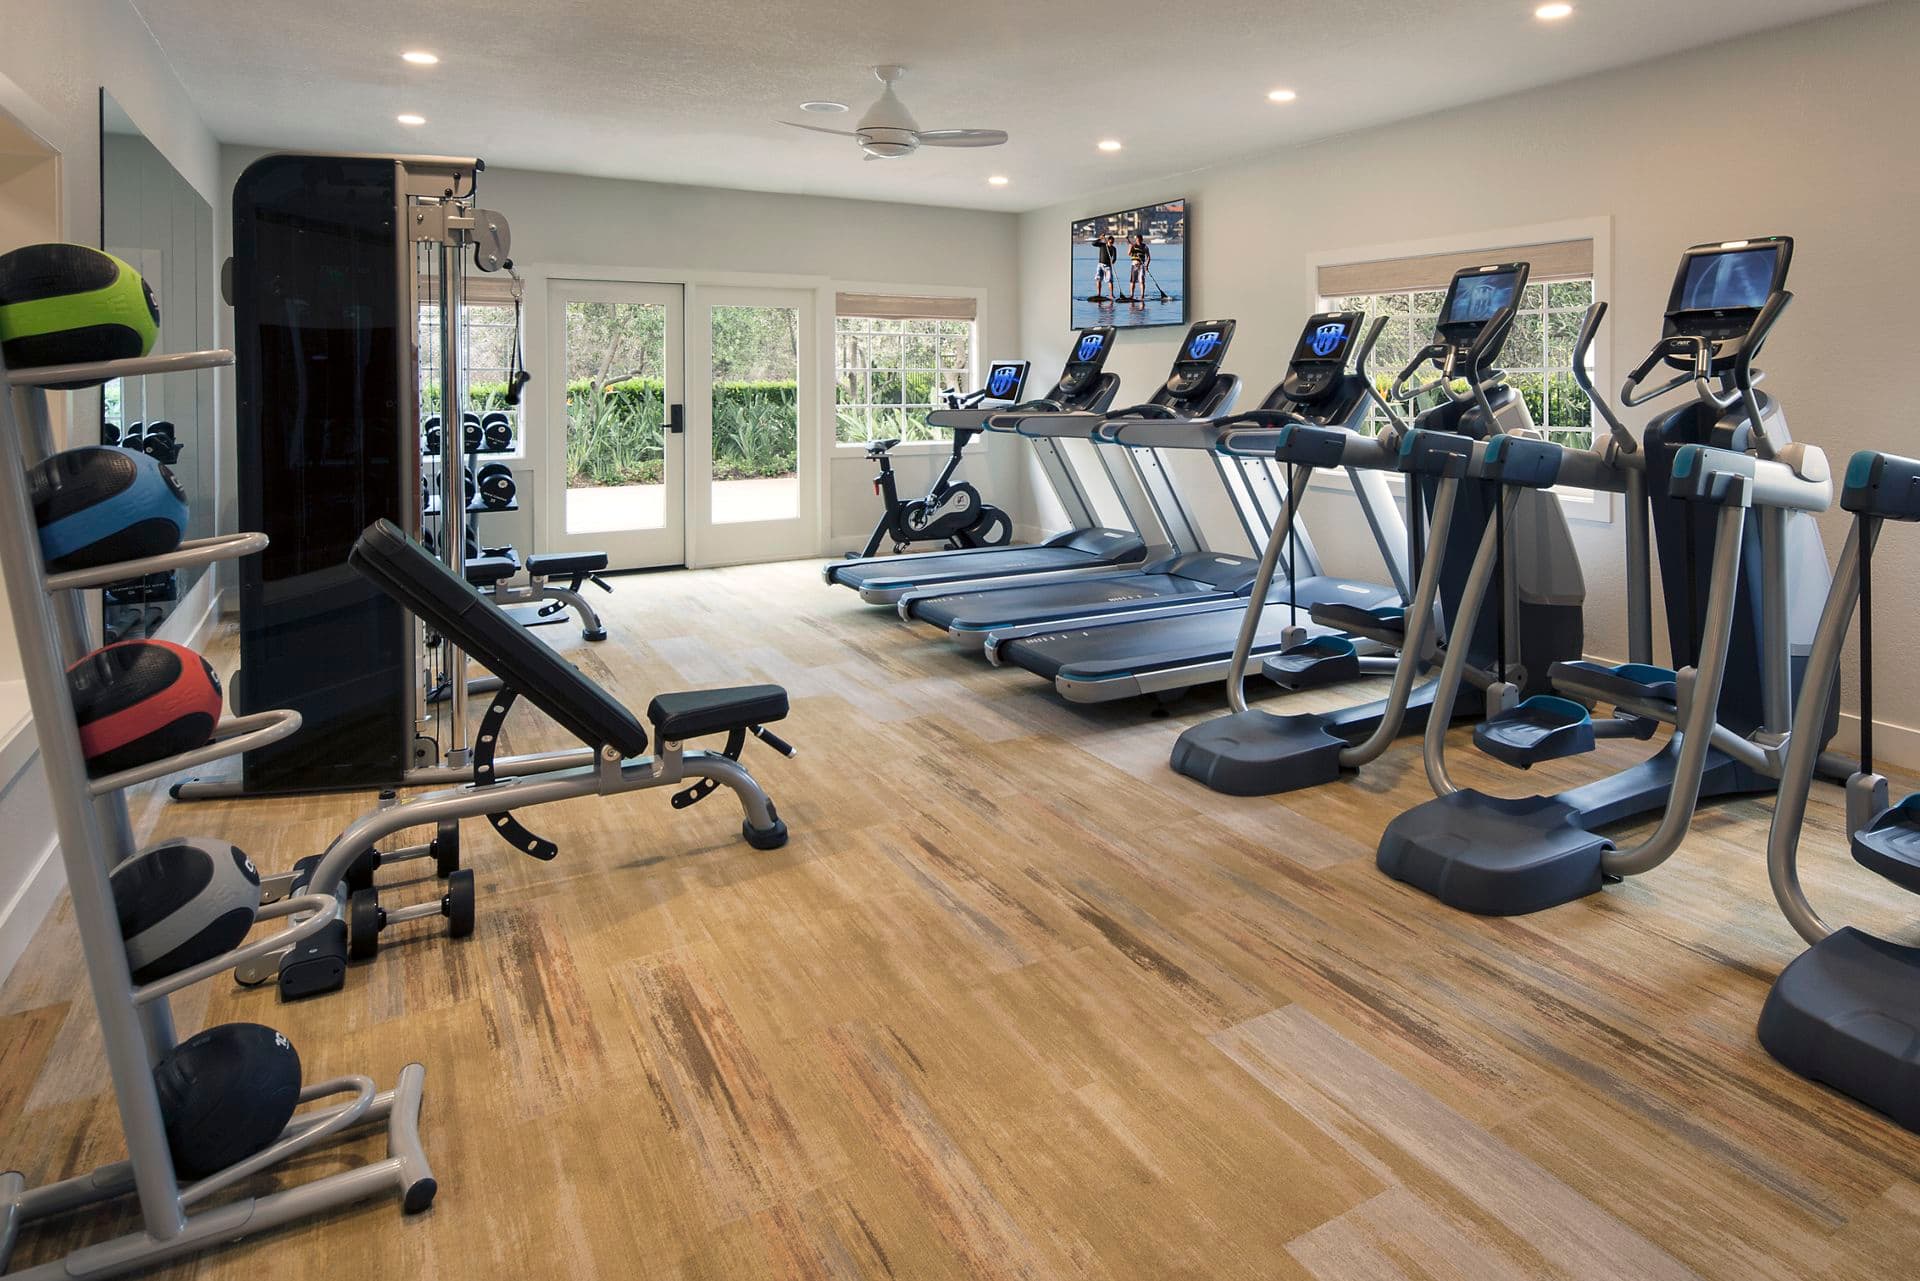 Interior view of fitness center at Aliso Town Center Apartment Homes in Aliso Viejo, CA.